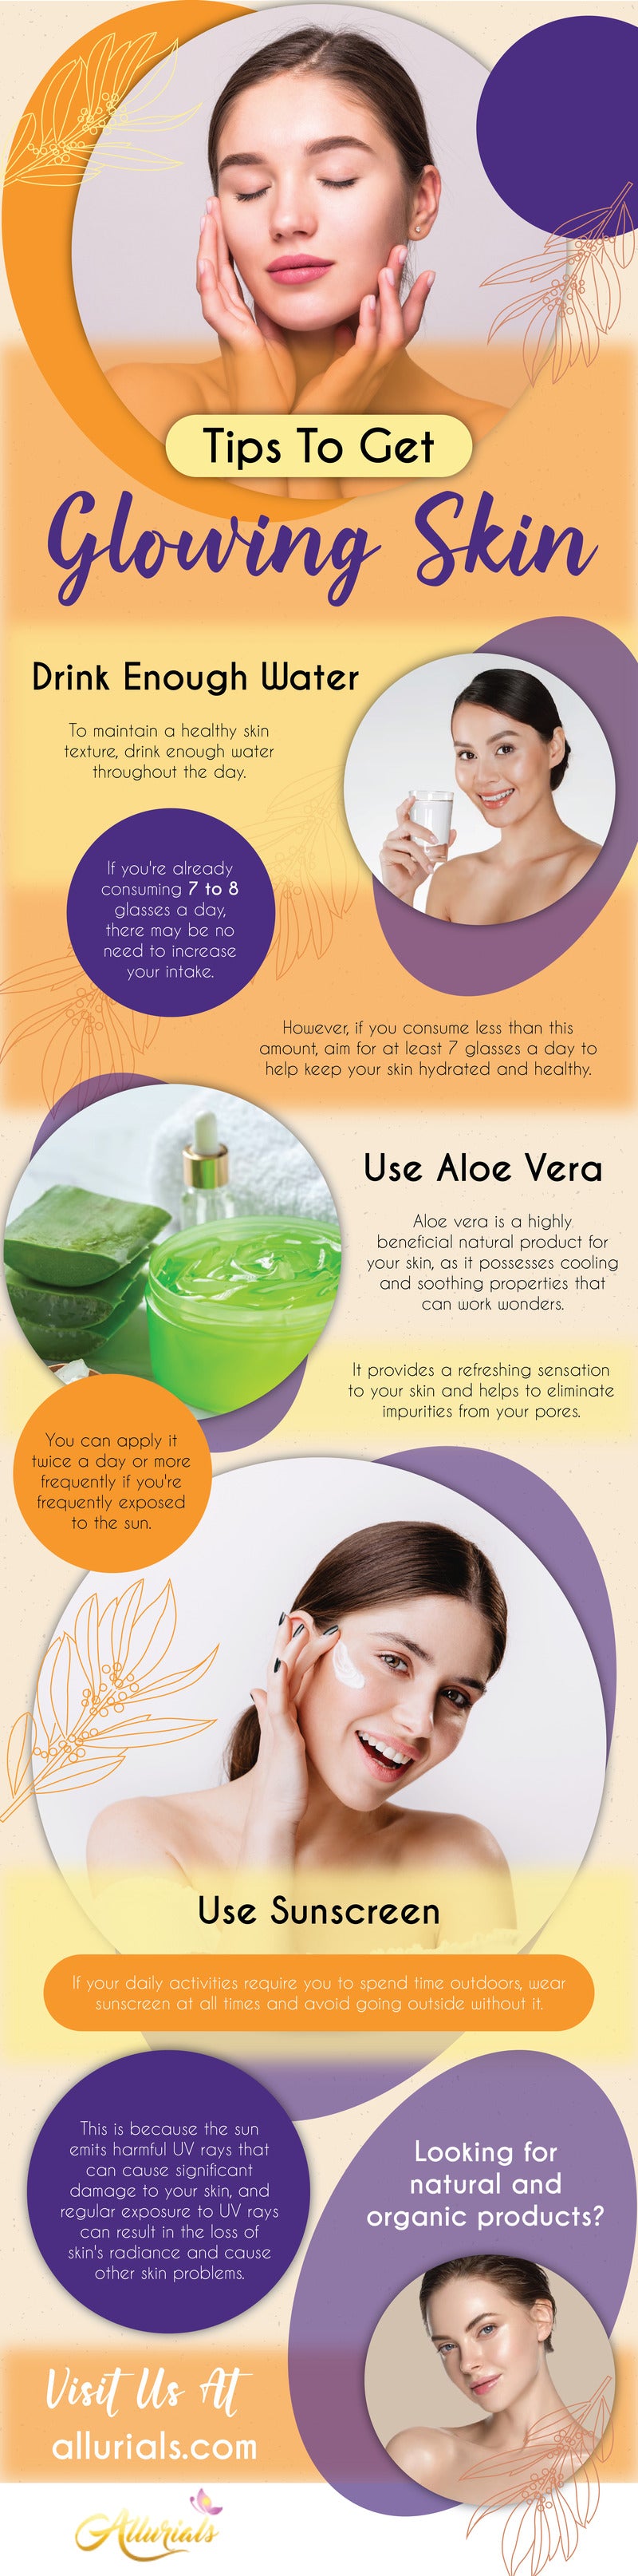 Tips To Get Glowing Skin